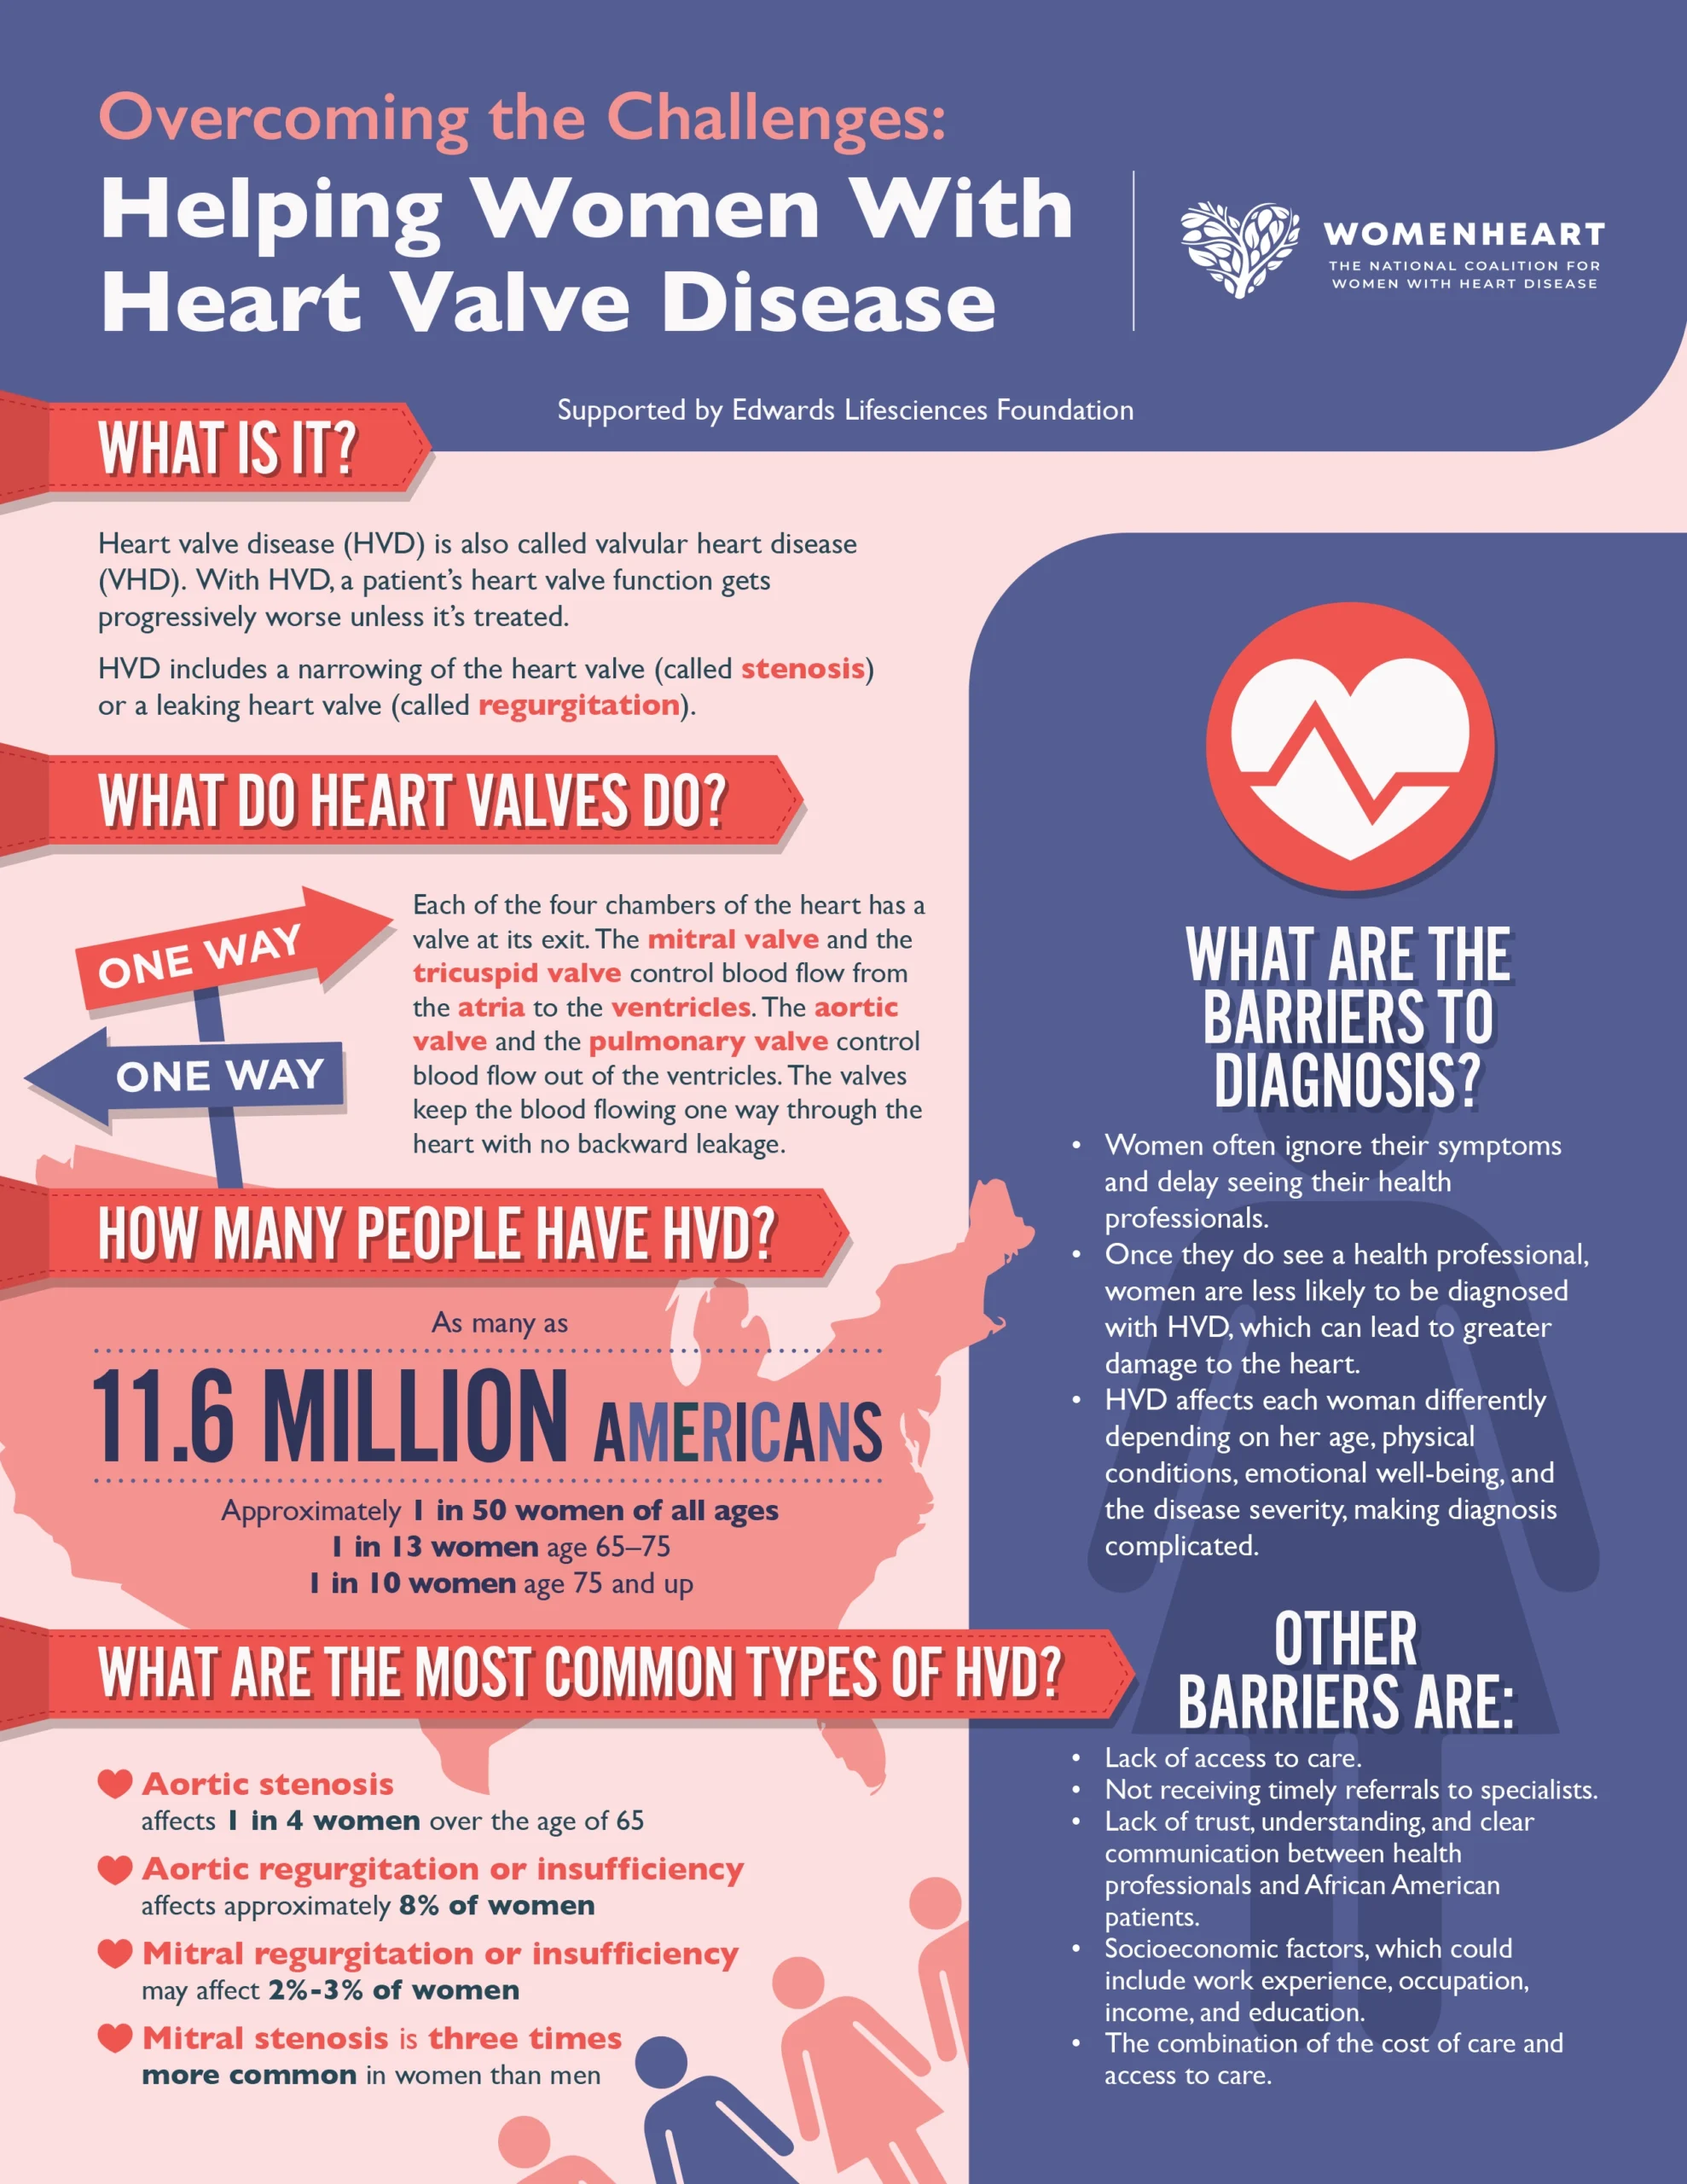 Overcoming the Challenges: Helping Women with Heart Valve Disease